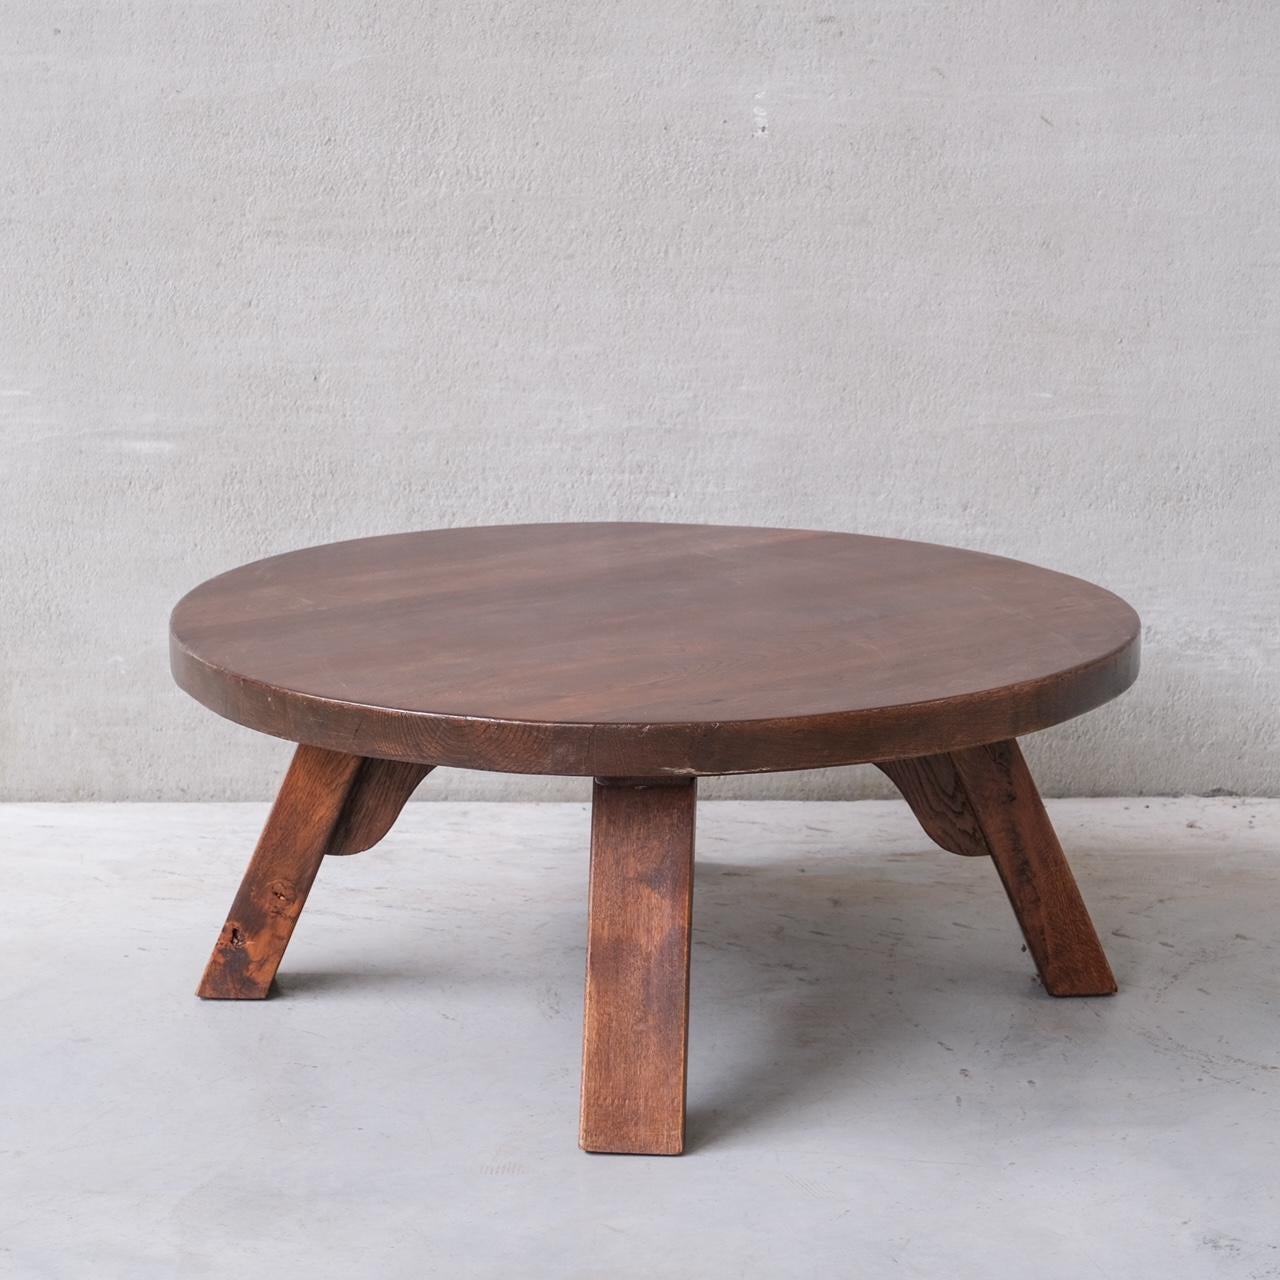 A four legged chunky wooden (likely oak) coffee table.

Holland, c1970s.

Good vintage condition, some scuffs and wear commensurate with age.

Internal Ref: 5/9/23/003.

Location: Belgium Gallery.

Dimensions: 108 Diameter x 45 Height in